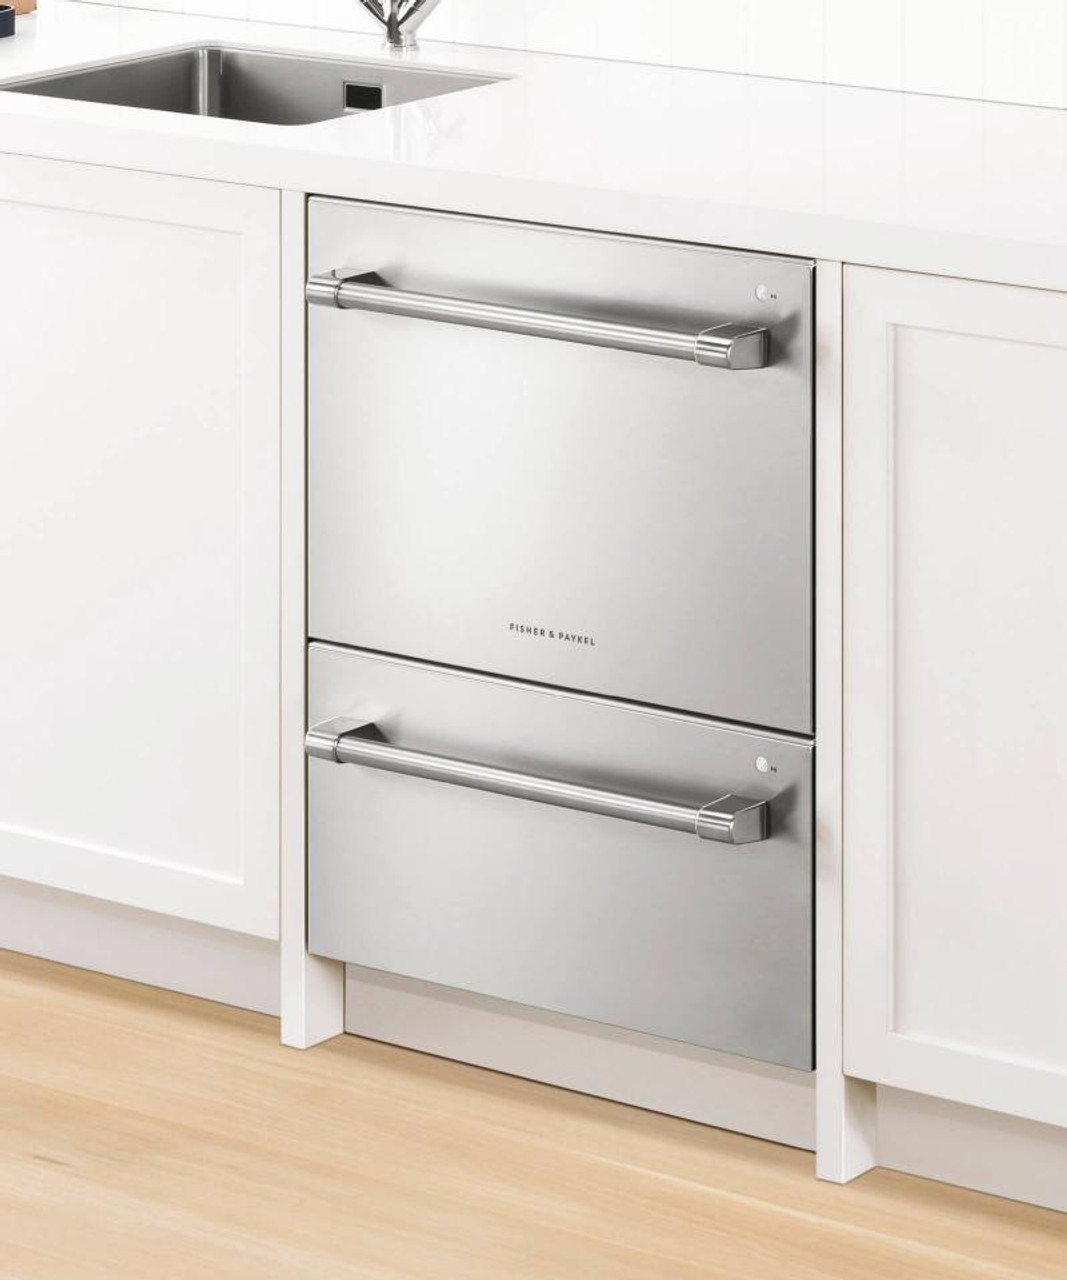 How Fisher & Paykel Dishwashers Are Simplifying Kitchen Design 2